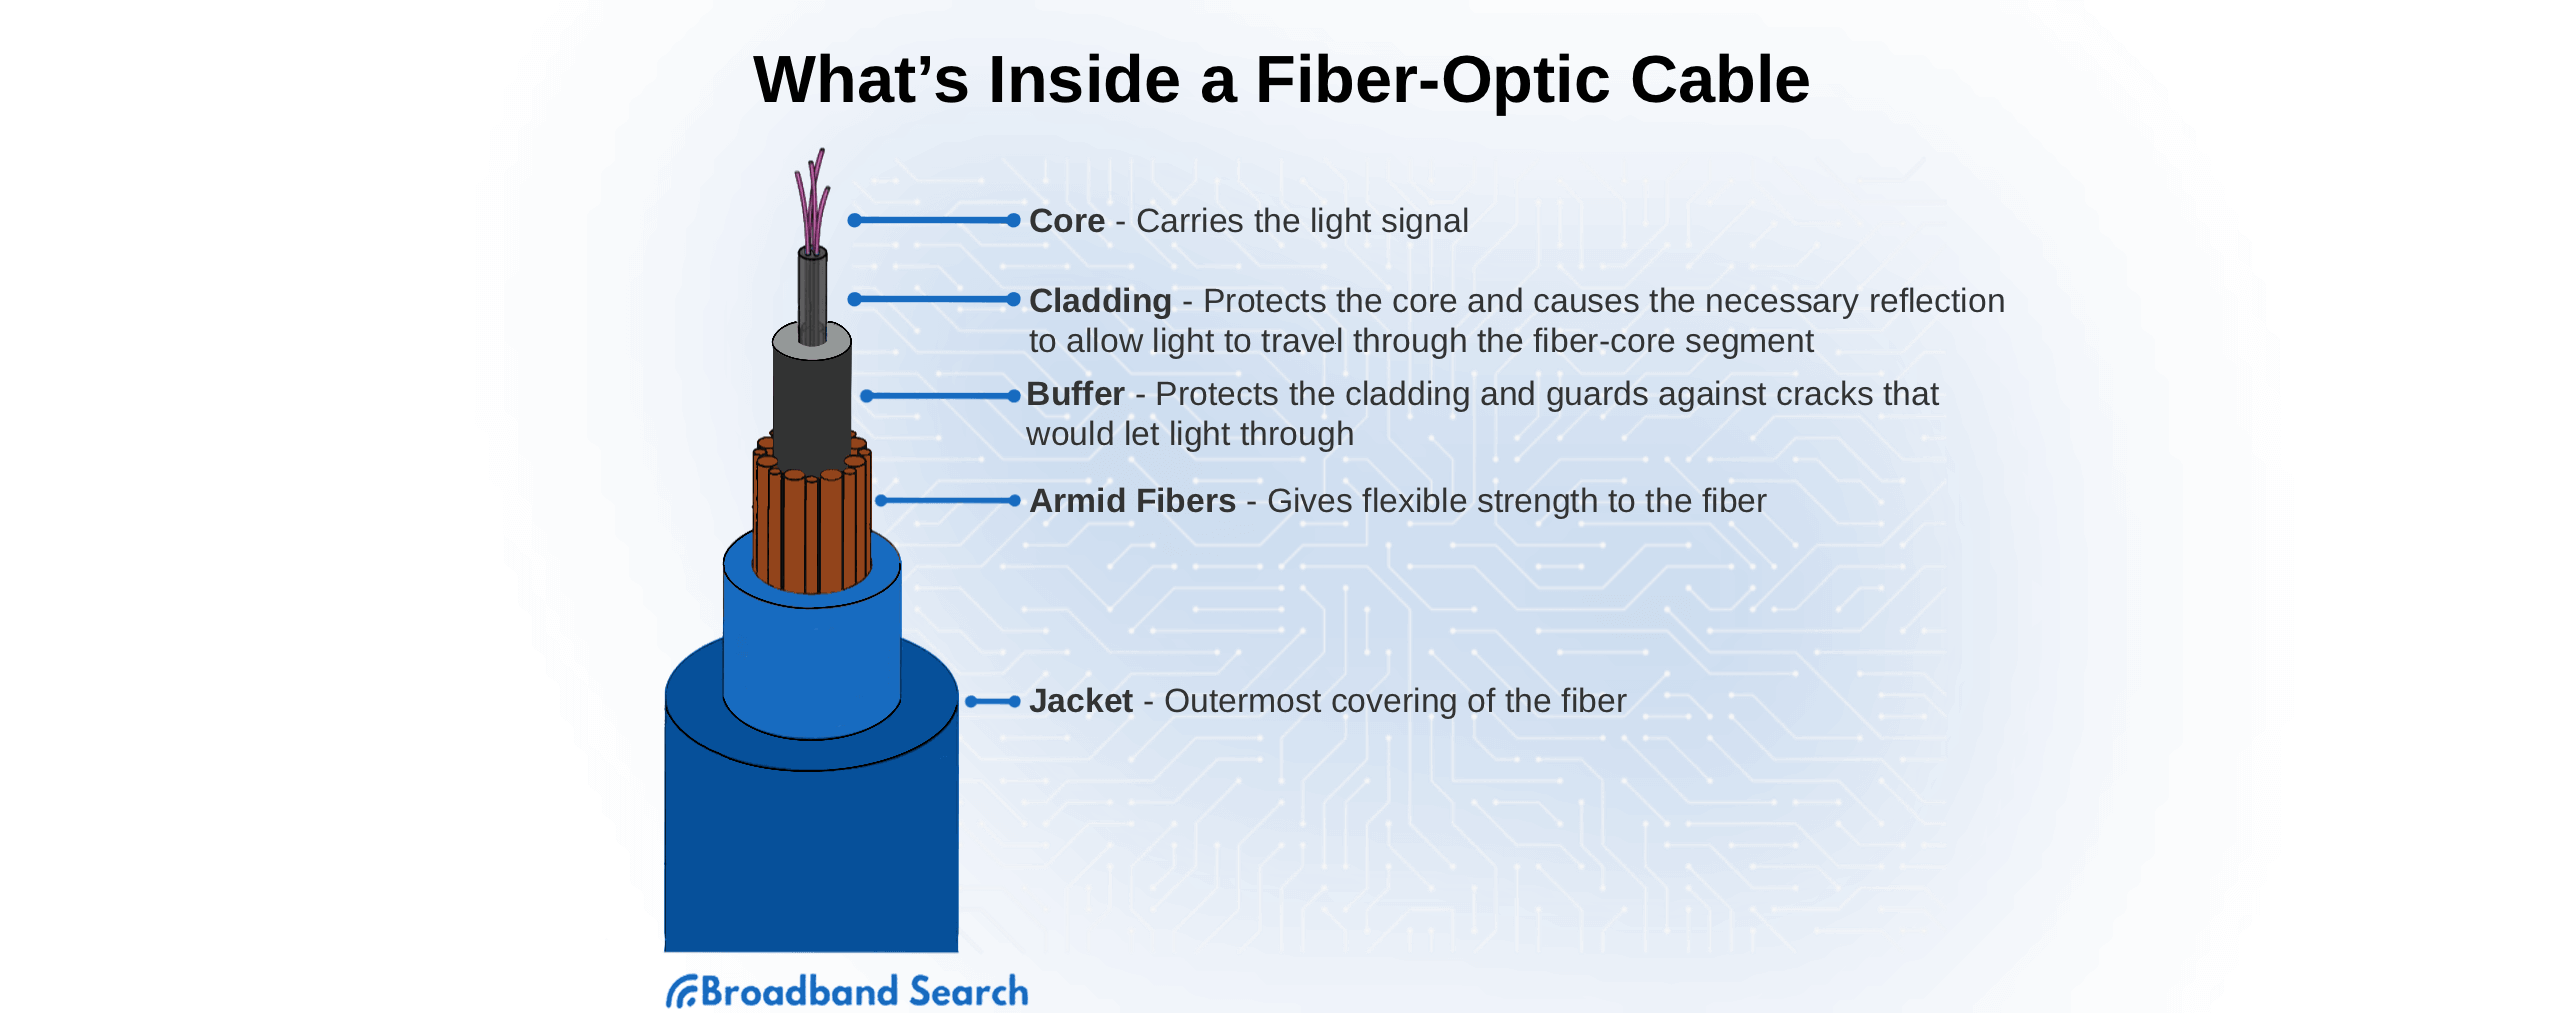 What's inside a fiber optic cable